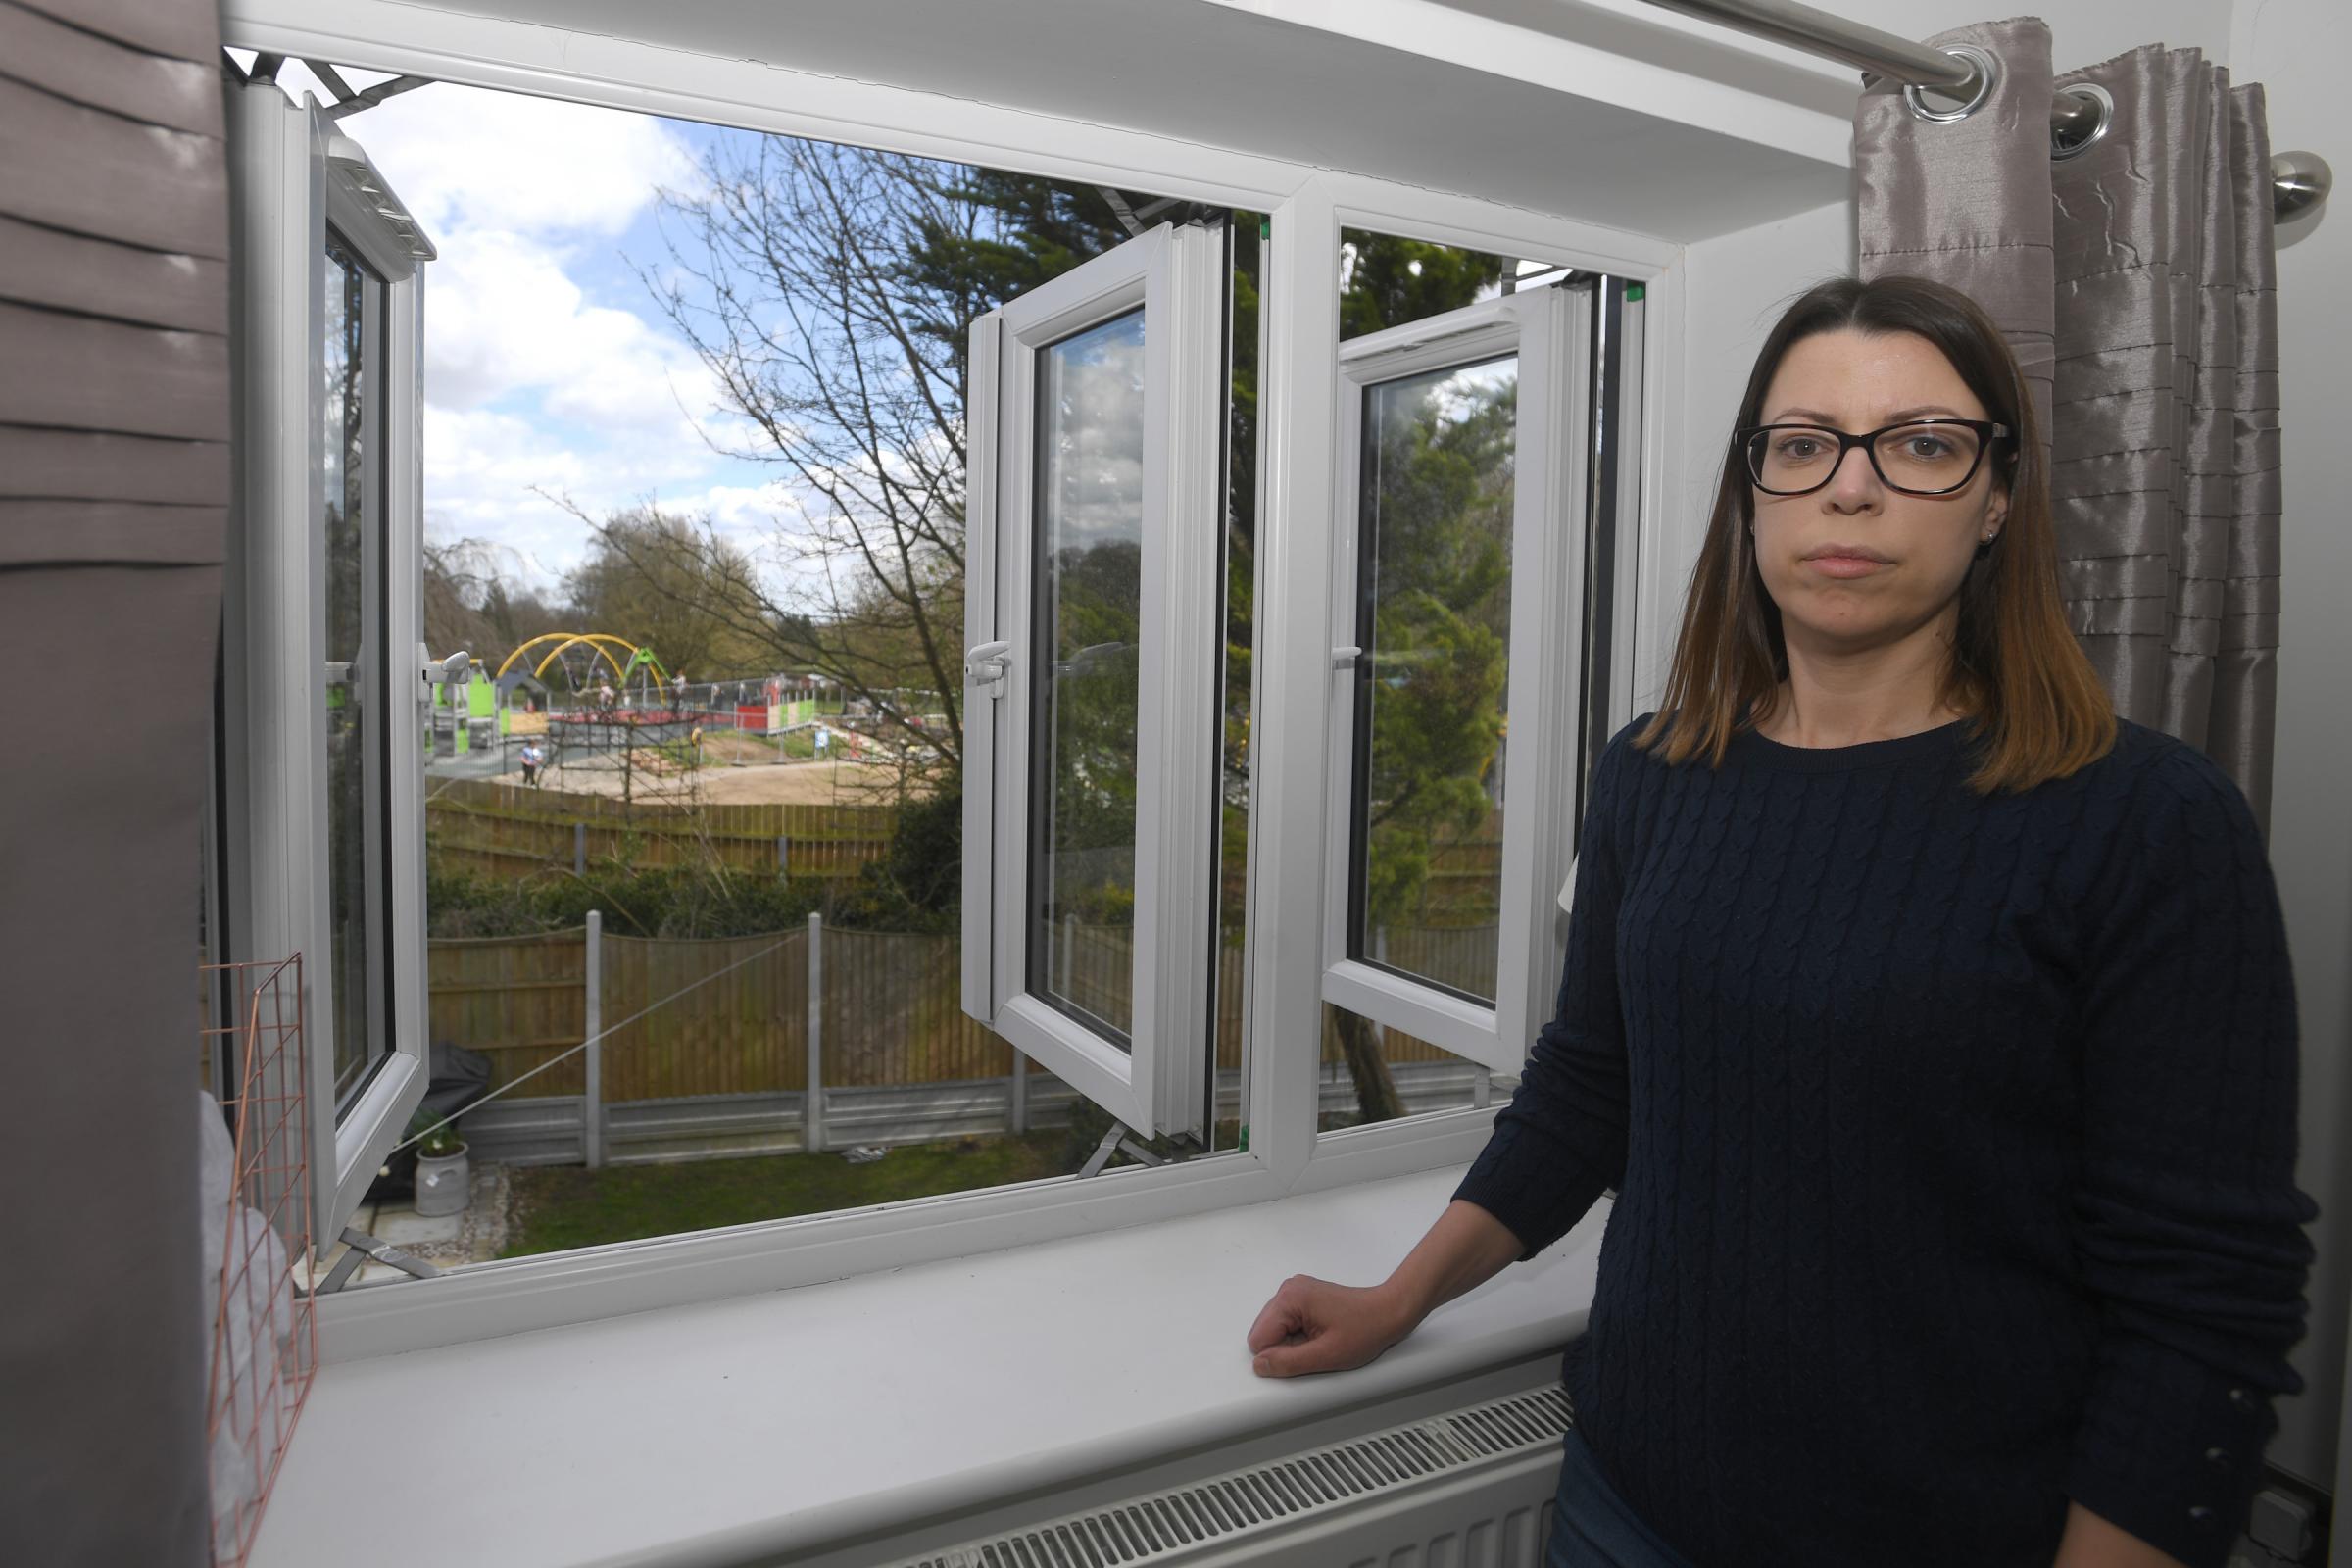 Leah Flack and her family are annoyed about anti-social behaviour fromadults drinking and swearing in a play area behind their back garden in Hartswood Road, Brentwood..